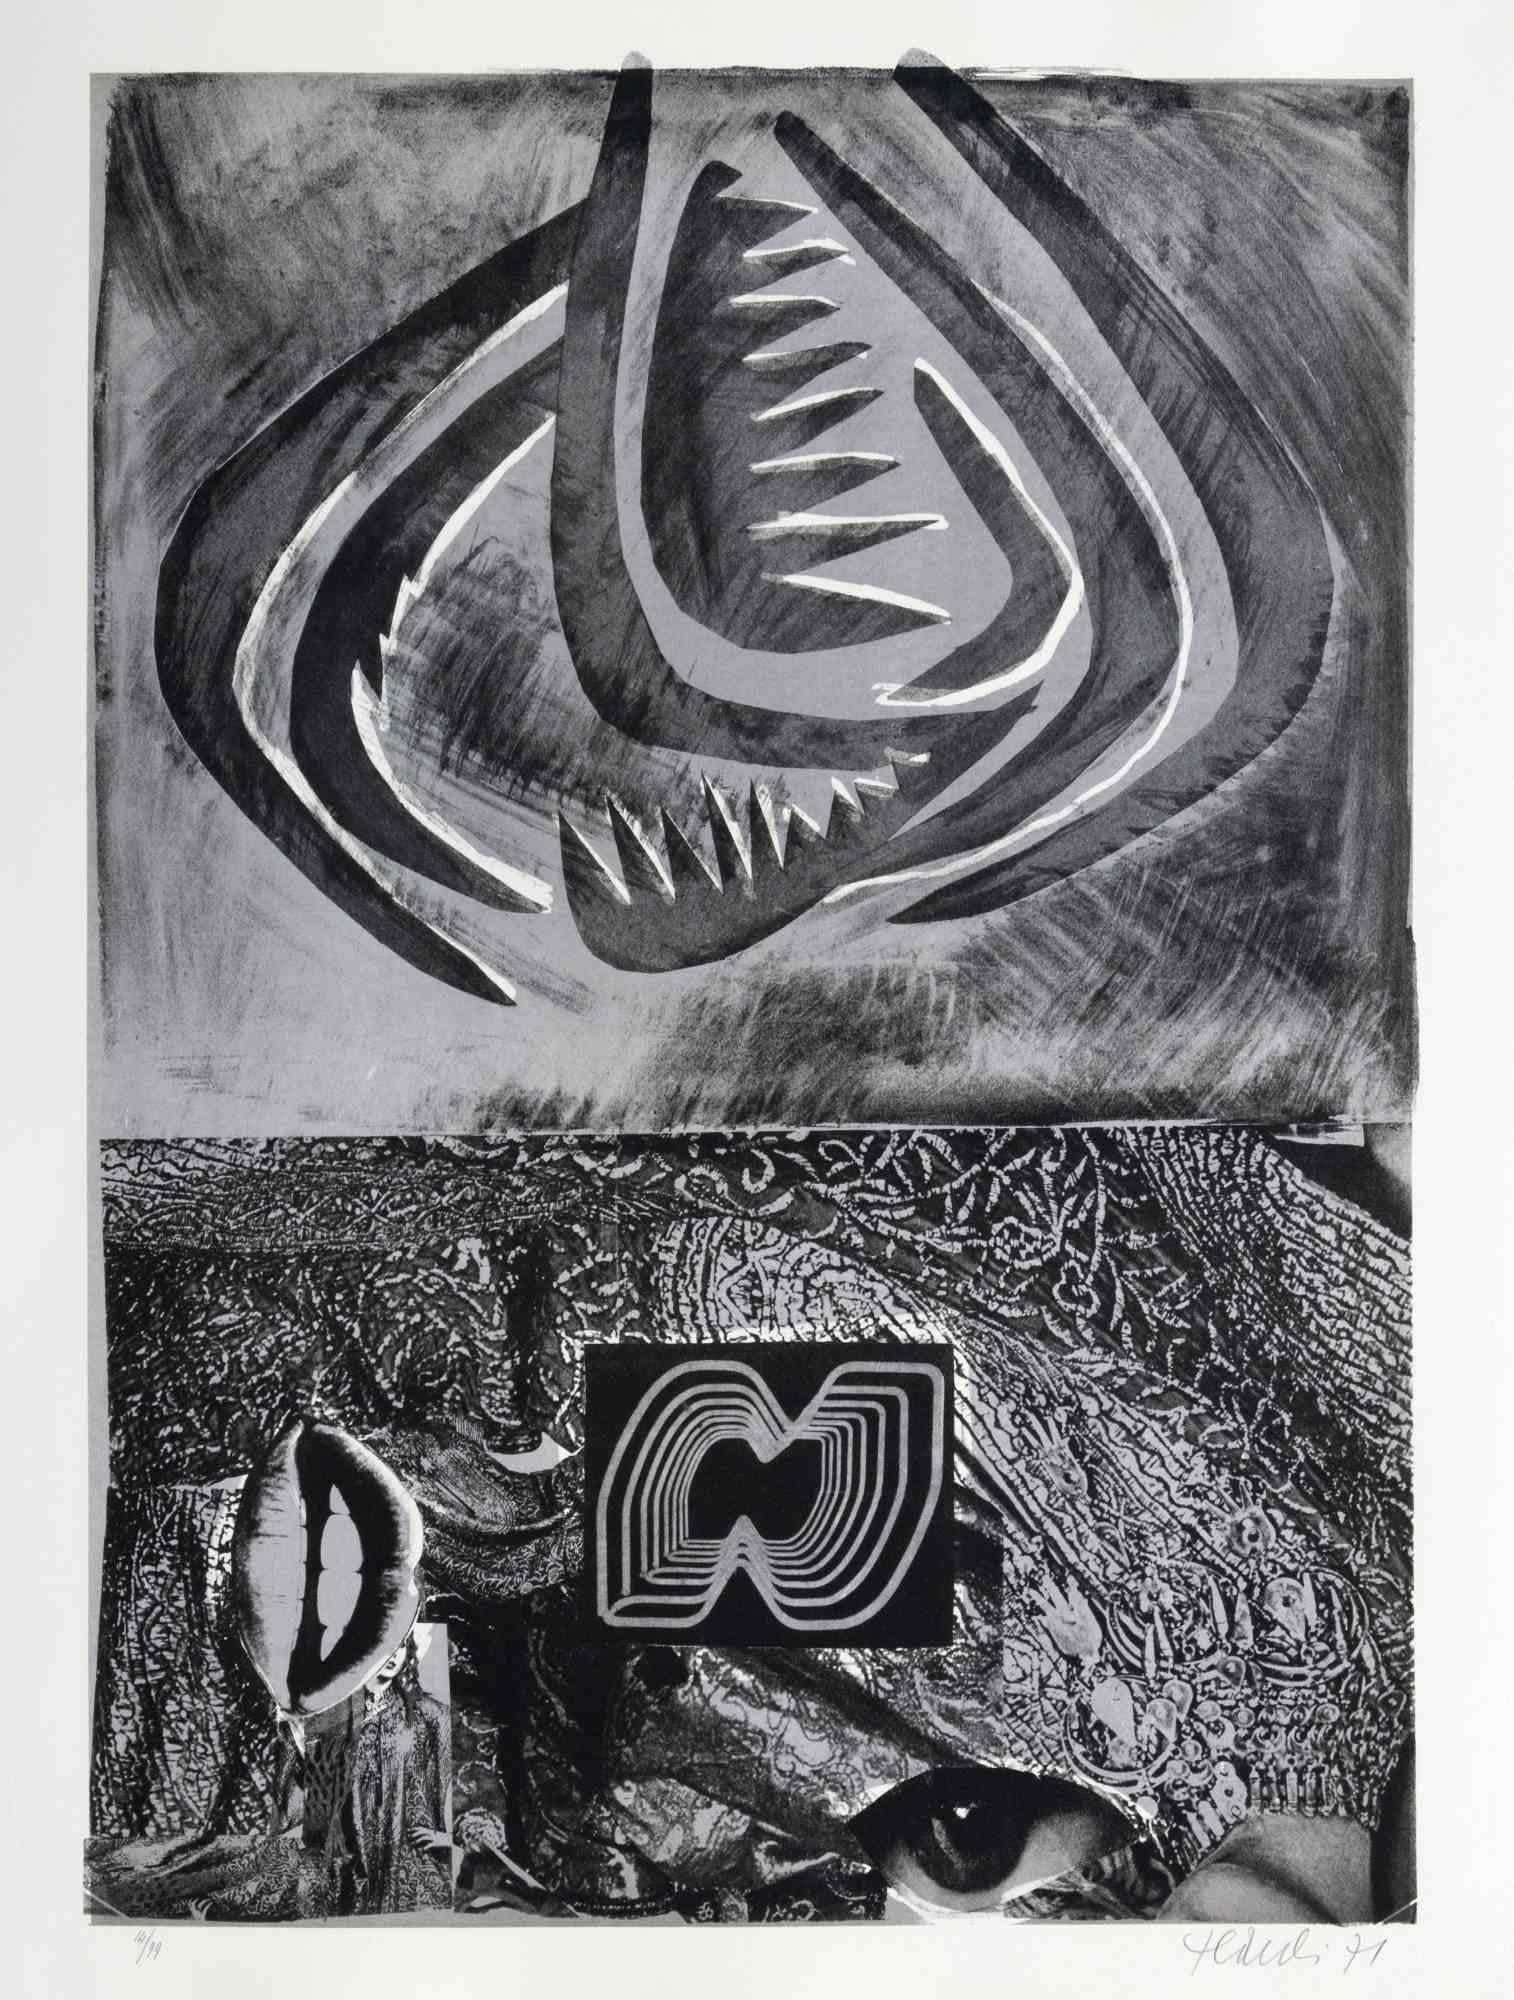 Tribal is an contemporary artwork realized by Nani Tedeschi in 1971.

Black and white lithograph.

Hand signed and dated on the lower margin.

Numbered on the lower margin.